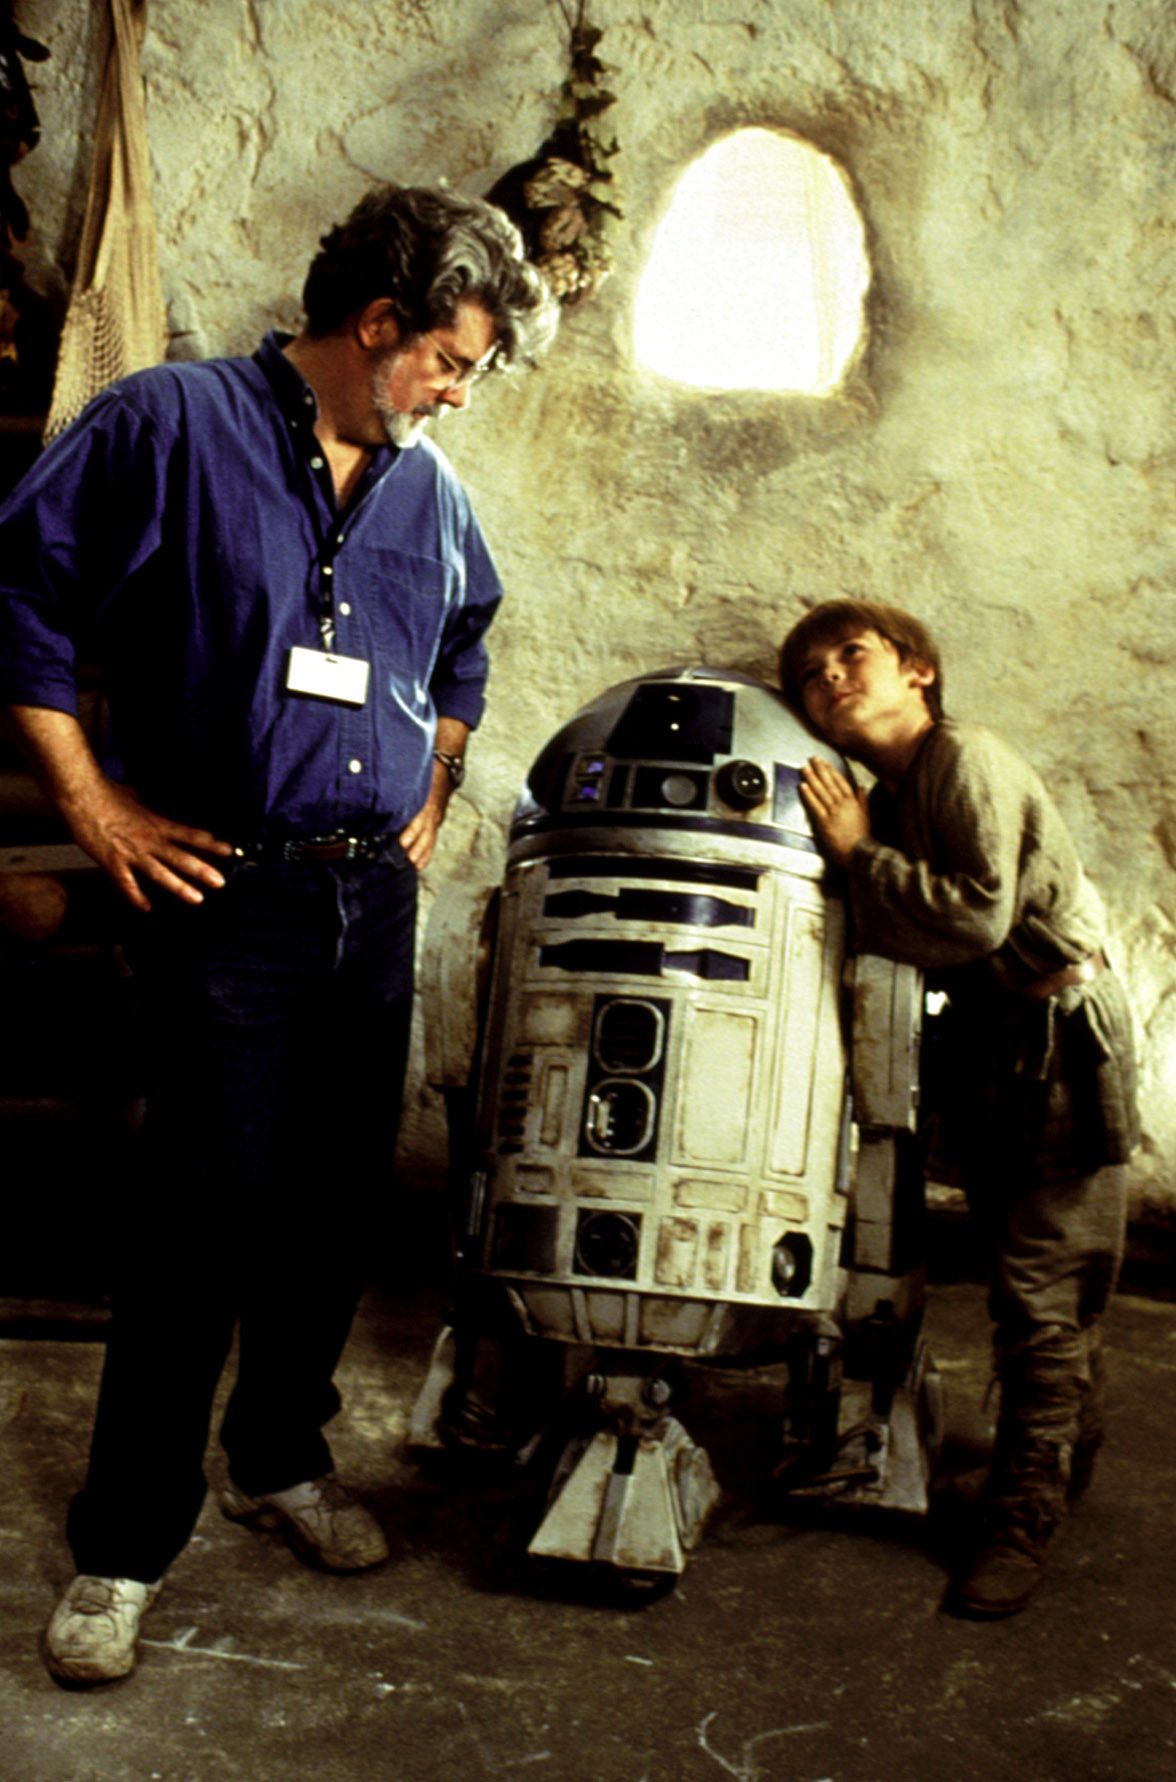 George Lucas on set with R2-D2 and Jake Lloyd